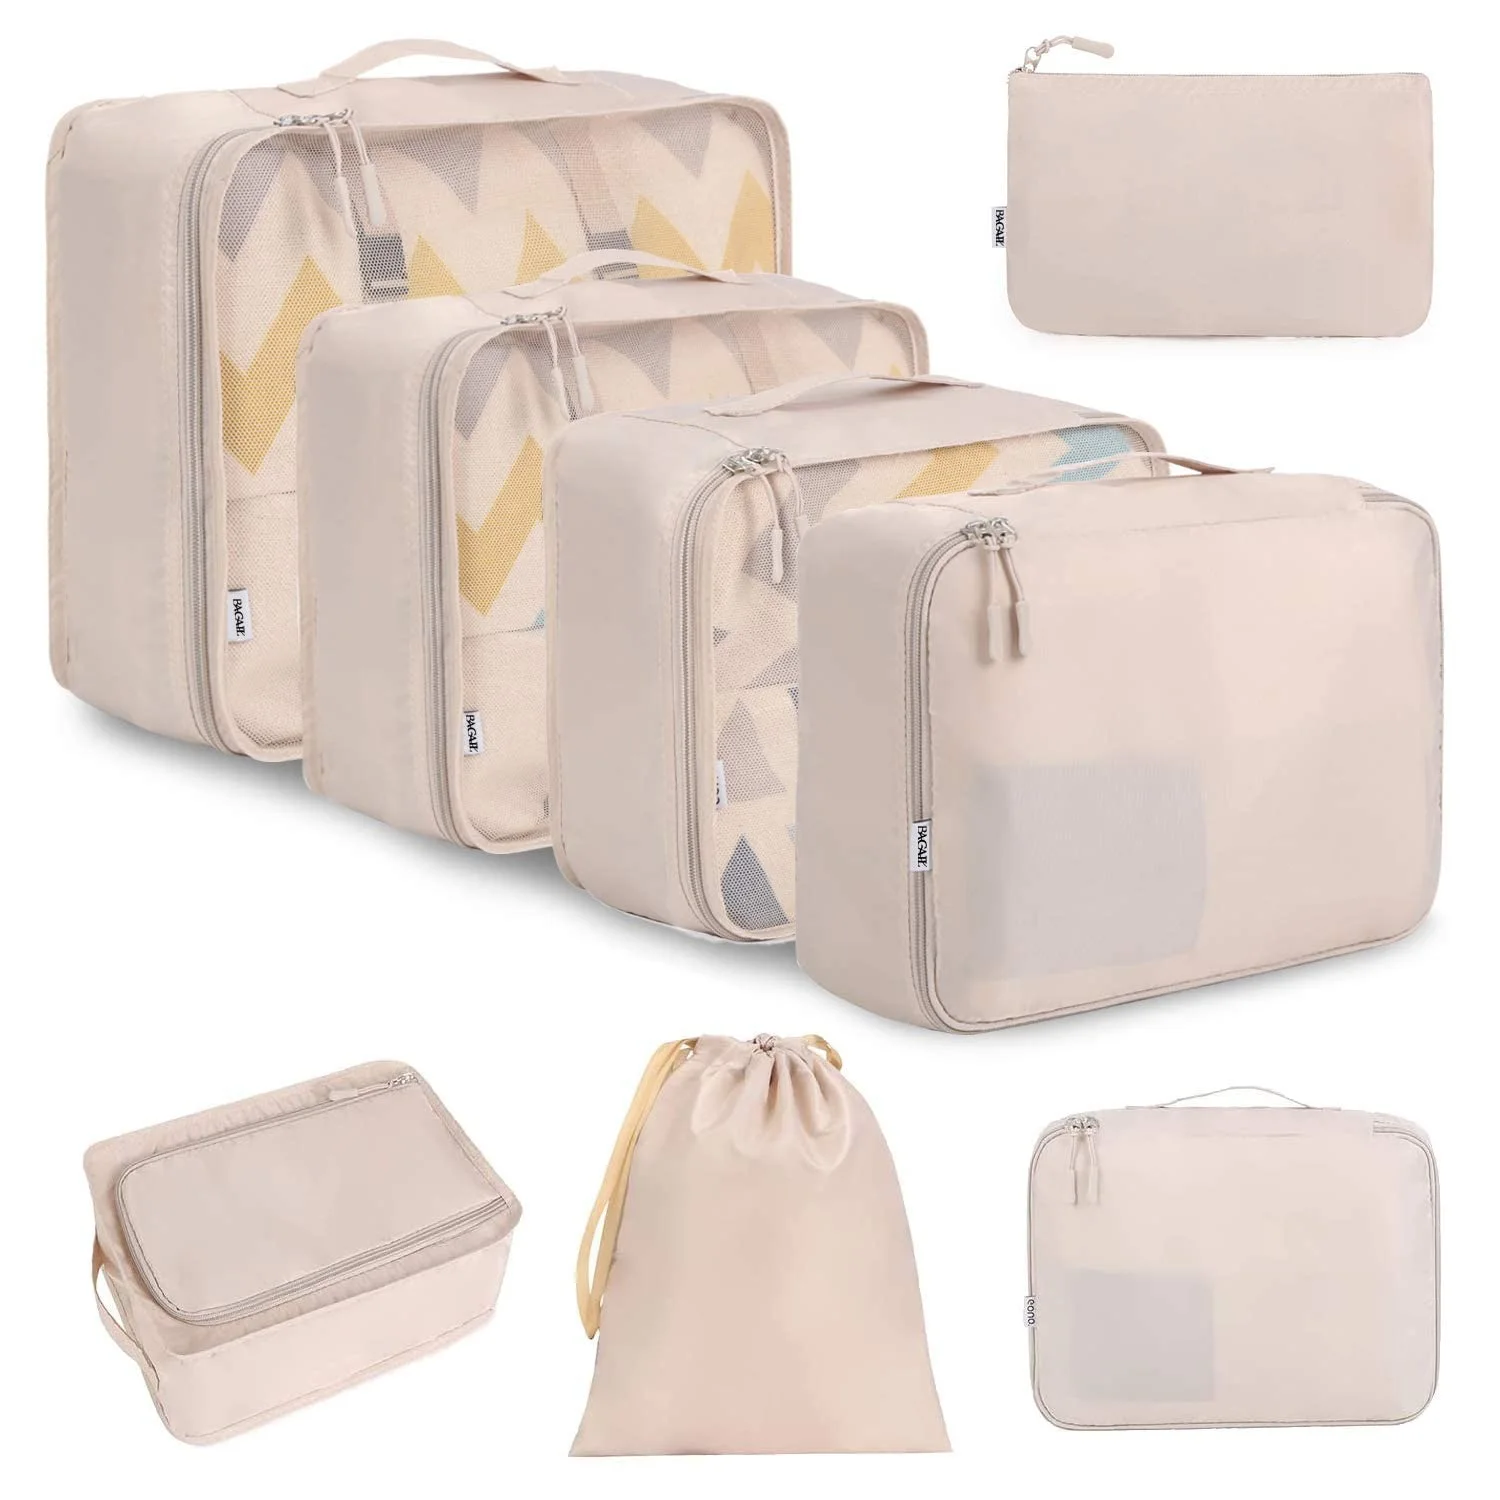 2023 New 8 Set Packing Cubes Luggage Packing Organizers For Travel ...